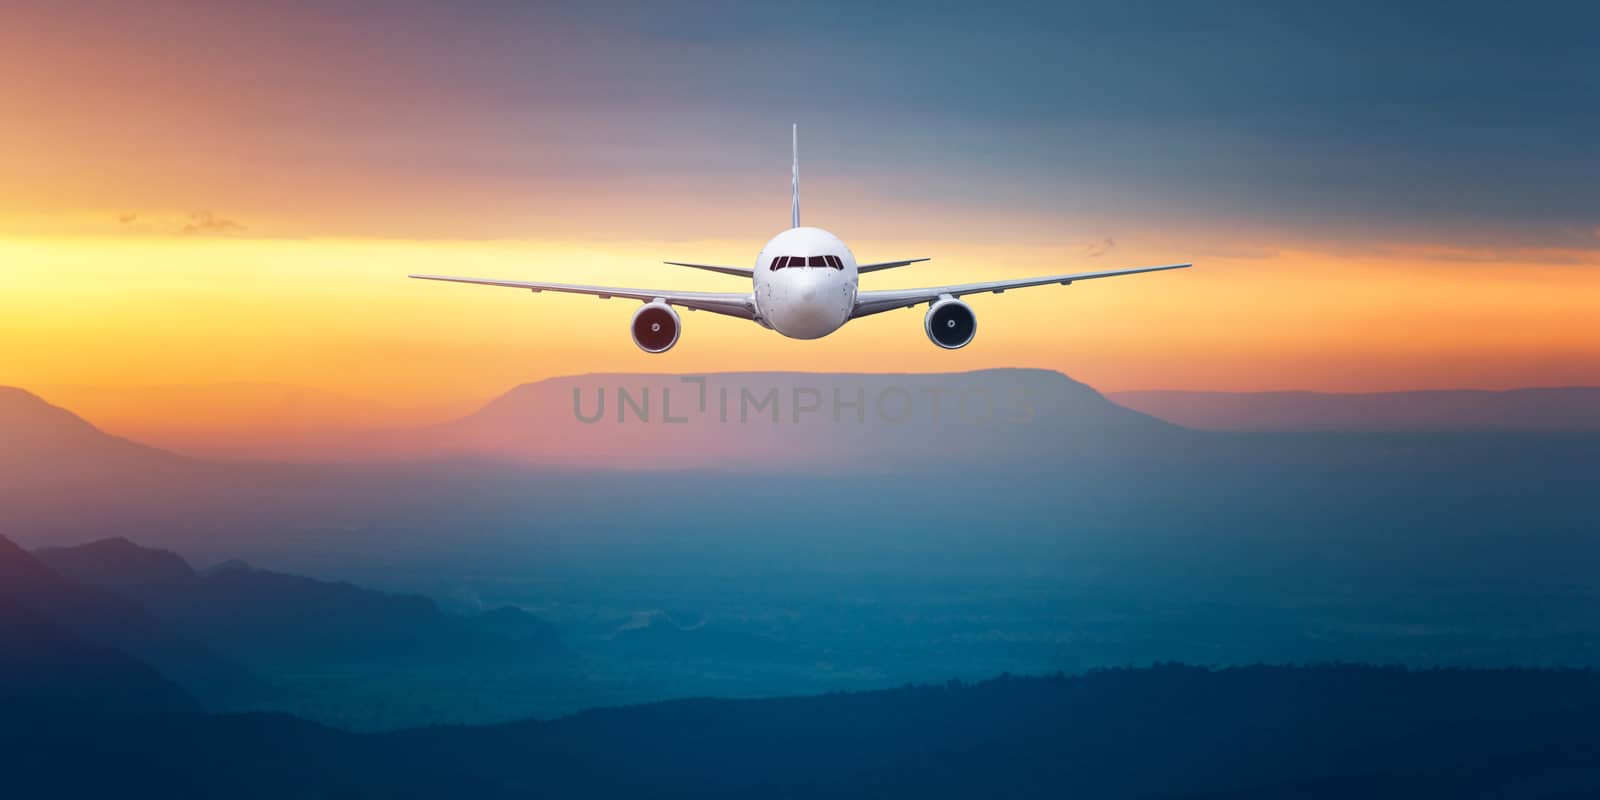 Front of real plane aircraft, isolated on sunset view background by Surasak